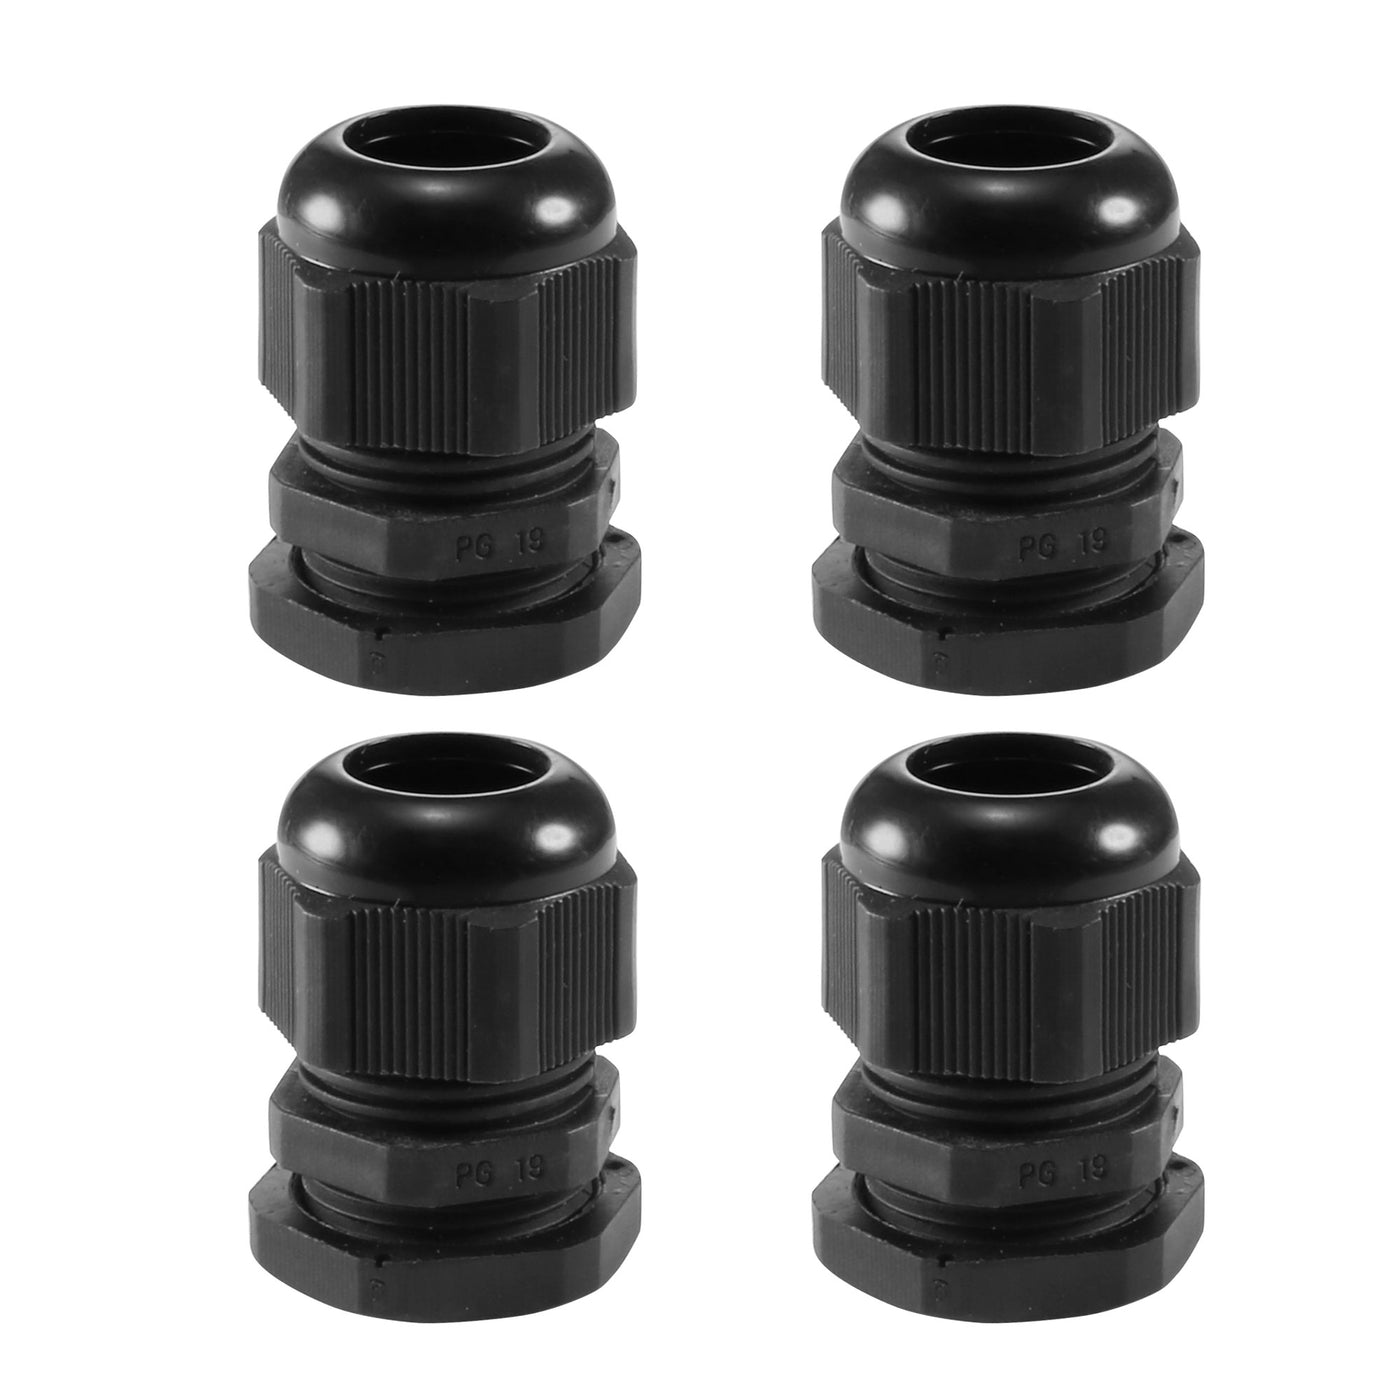 uxcell Uxcell 4Pcs PG19 Cable Gland Waterproof Plastic Joint Adjustable Locknut Black for 12mm-15mm Dia Cable Wire